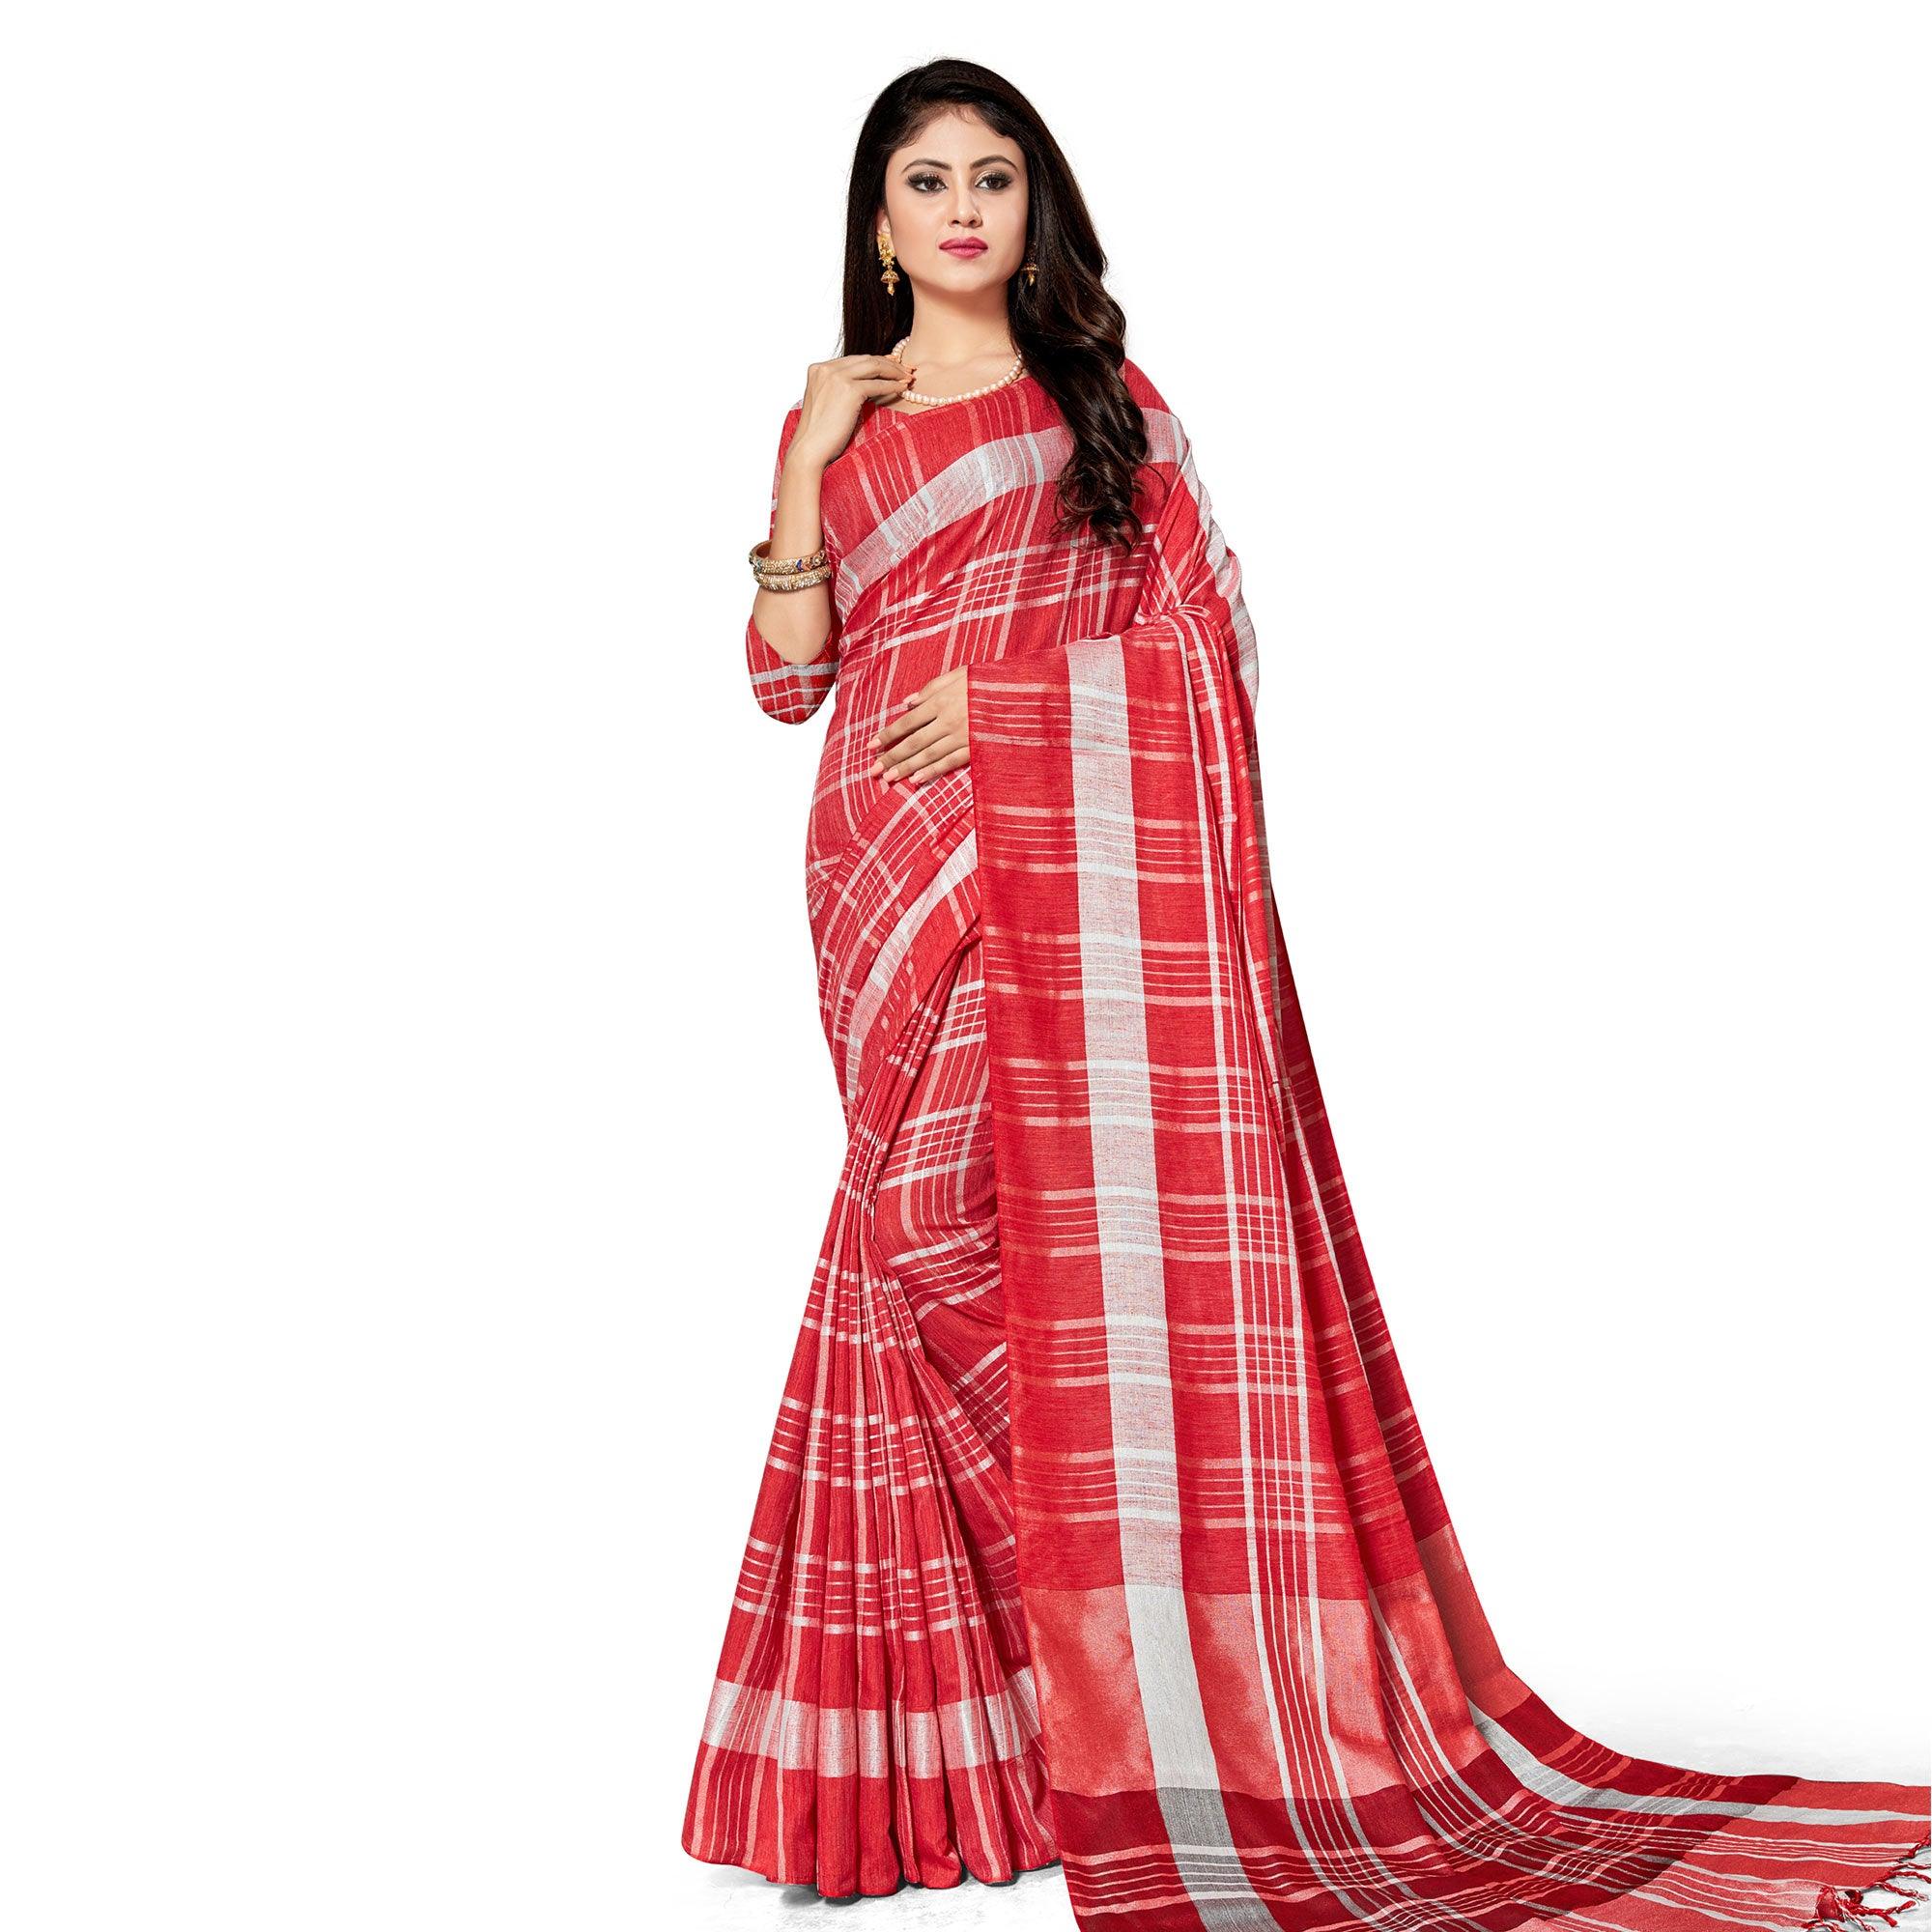 Appealing Red Colored Fesive Wear Stripe Print Cotton Silk Saree With Tassels - Peachmode